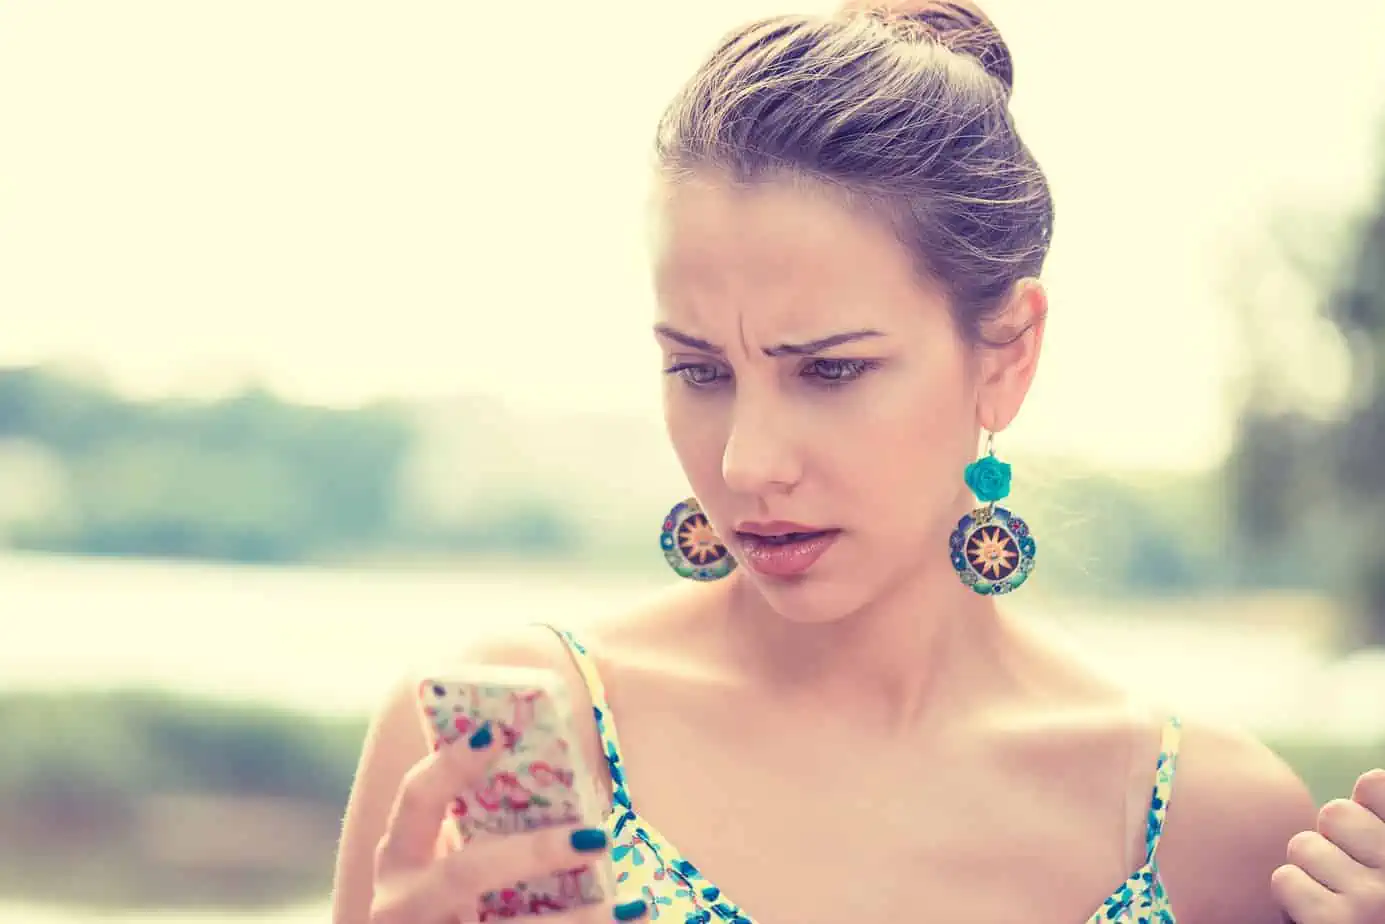 A woman looking at her cell phone while wearing earrings